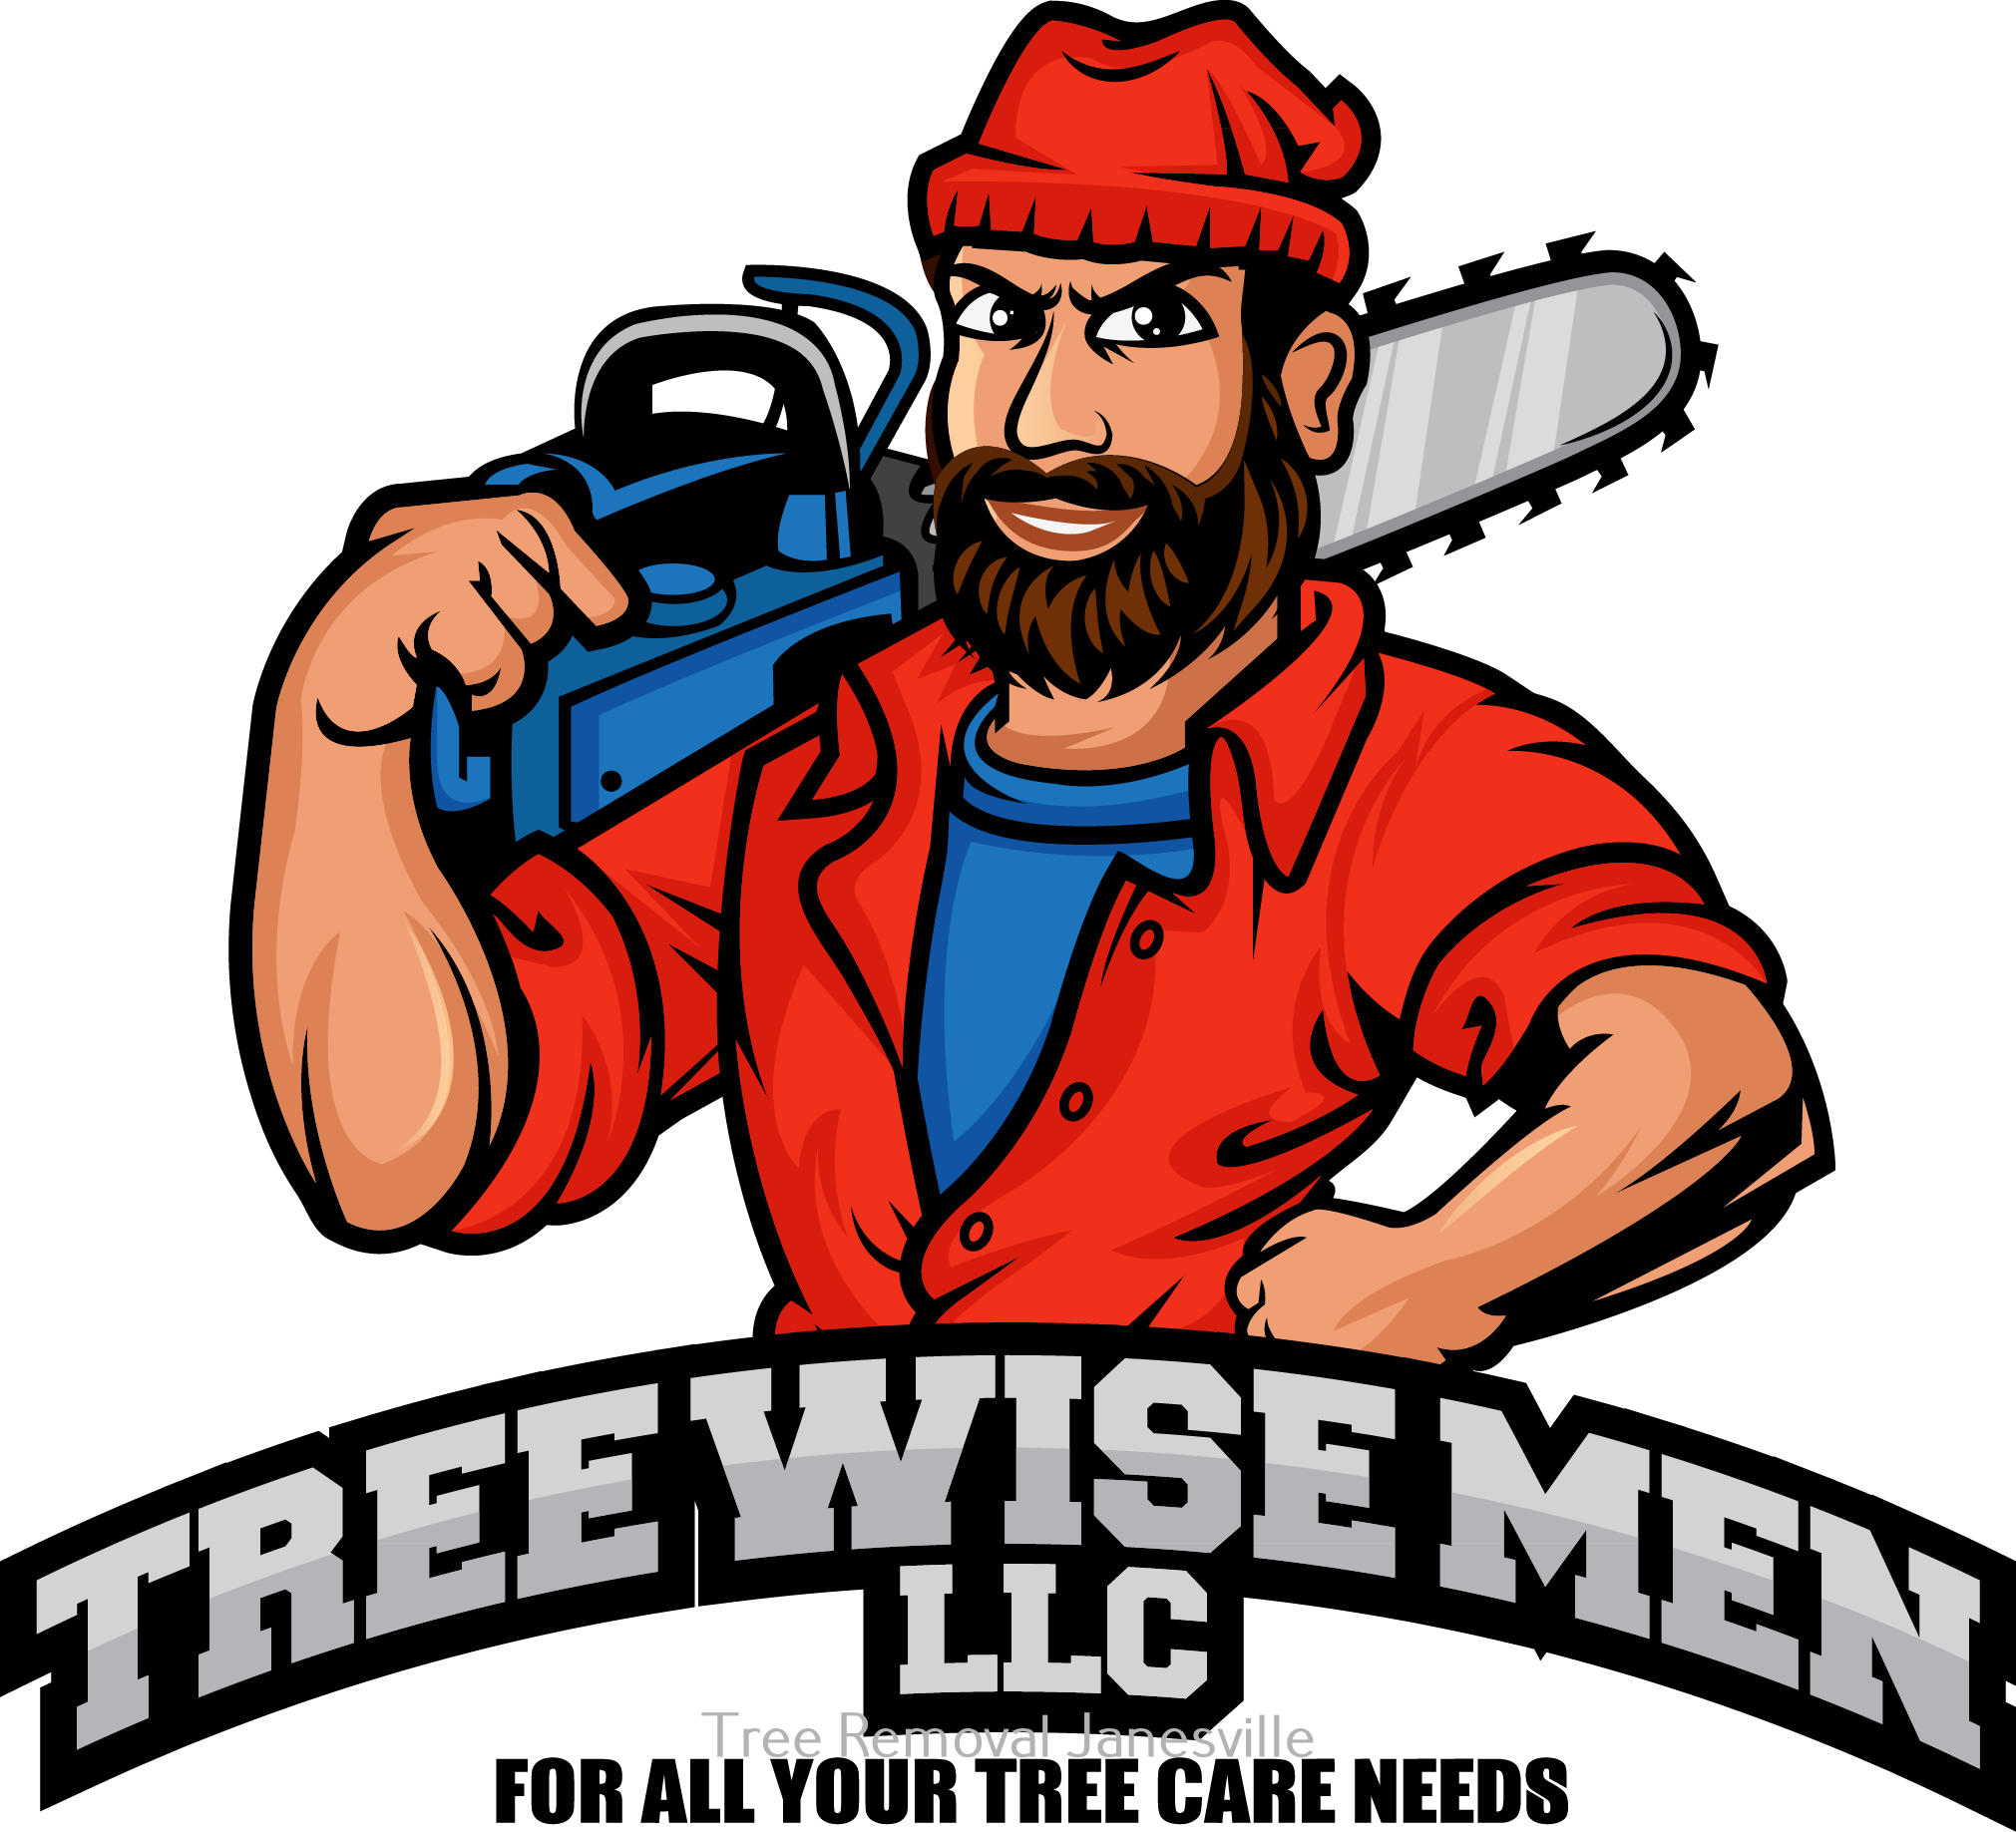 Tree Wise Men LLC Outlines Environmentally Conscious Practices in Tree Removal